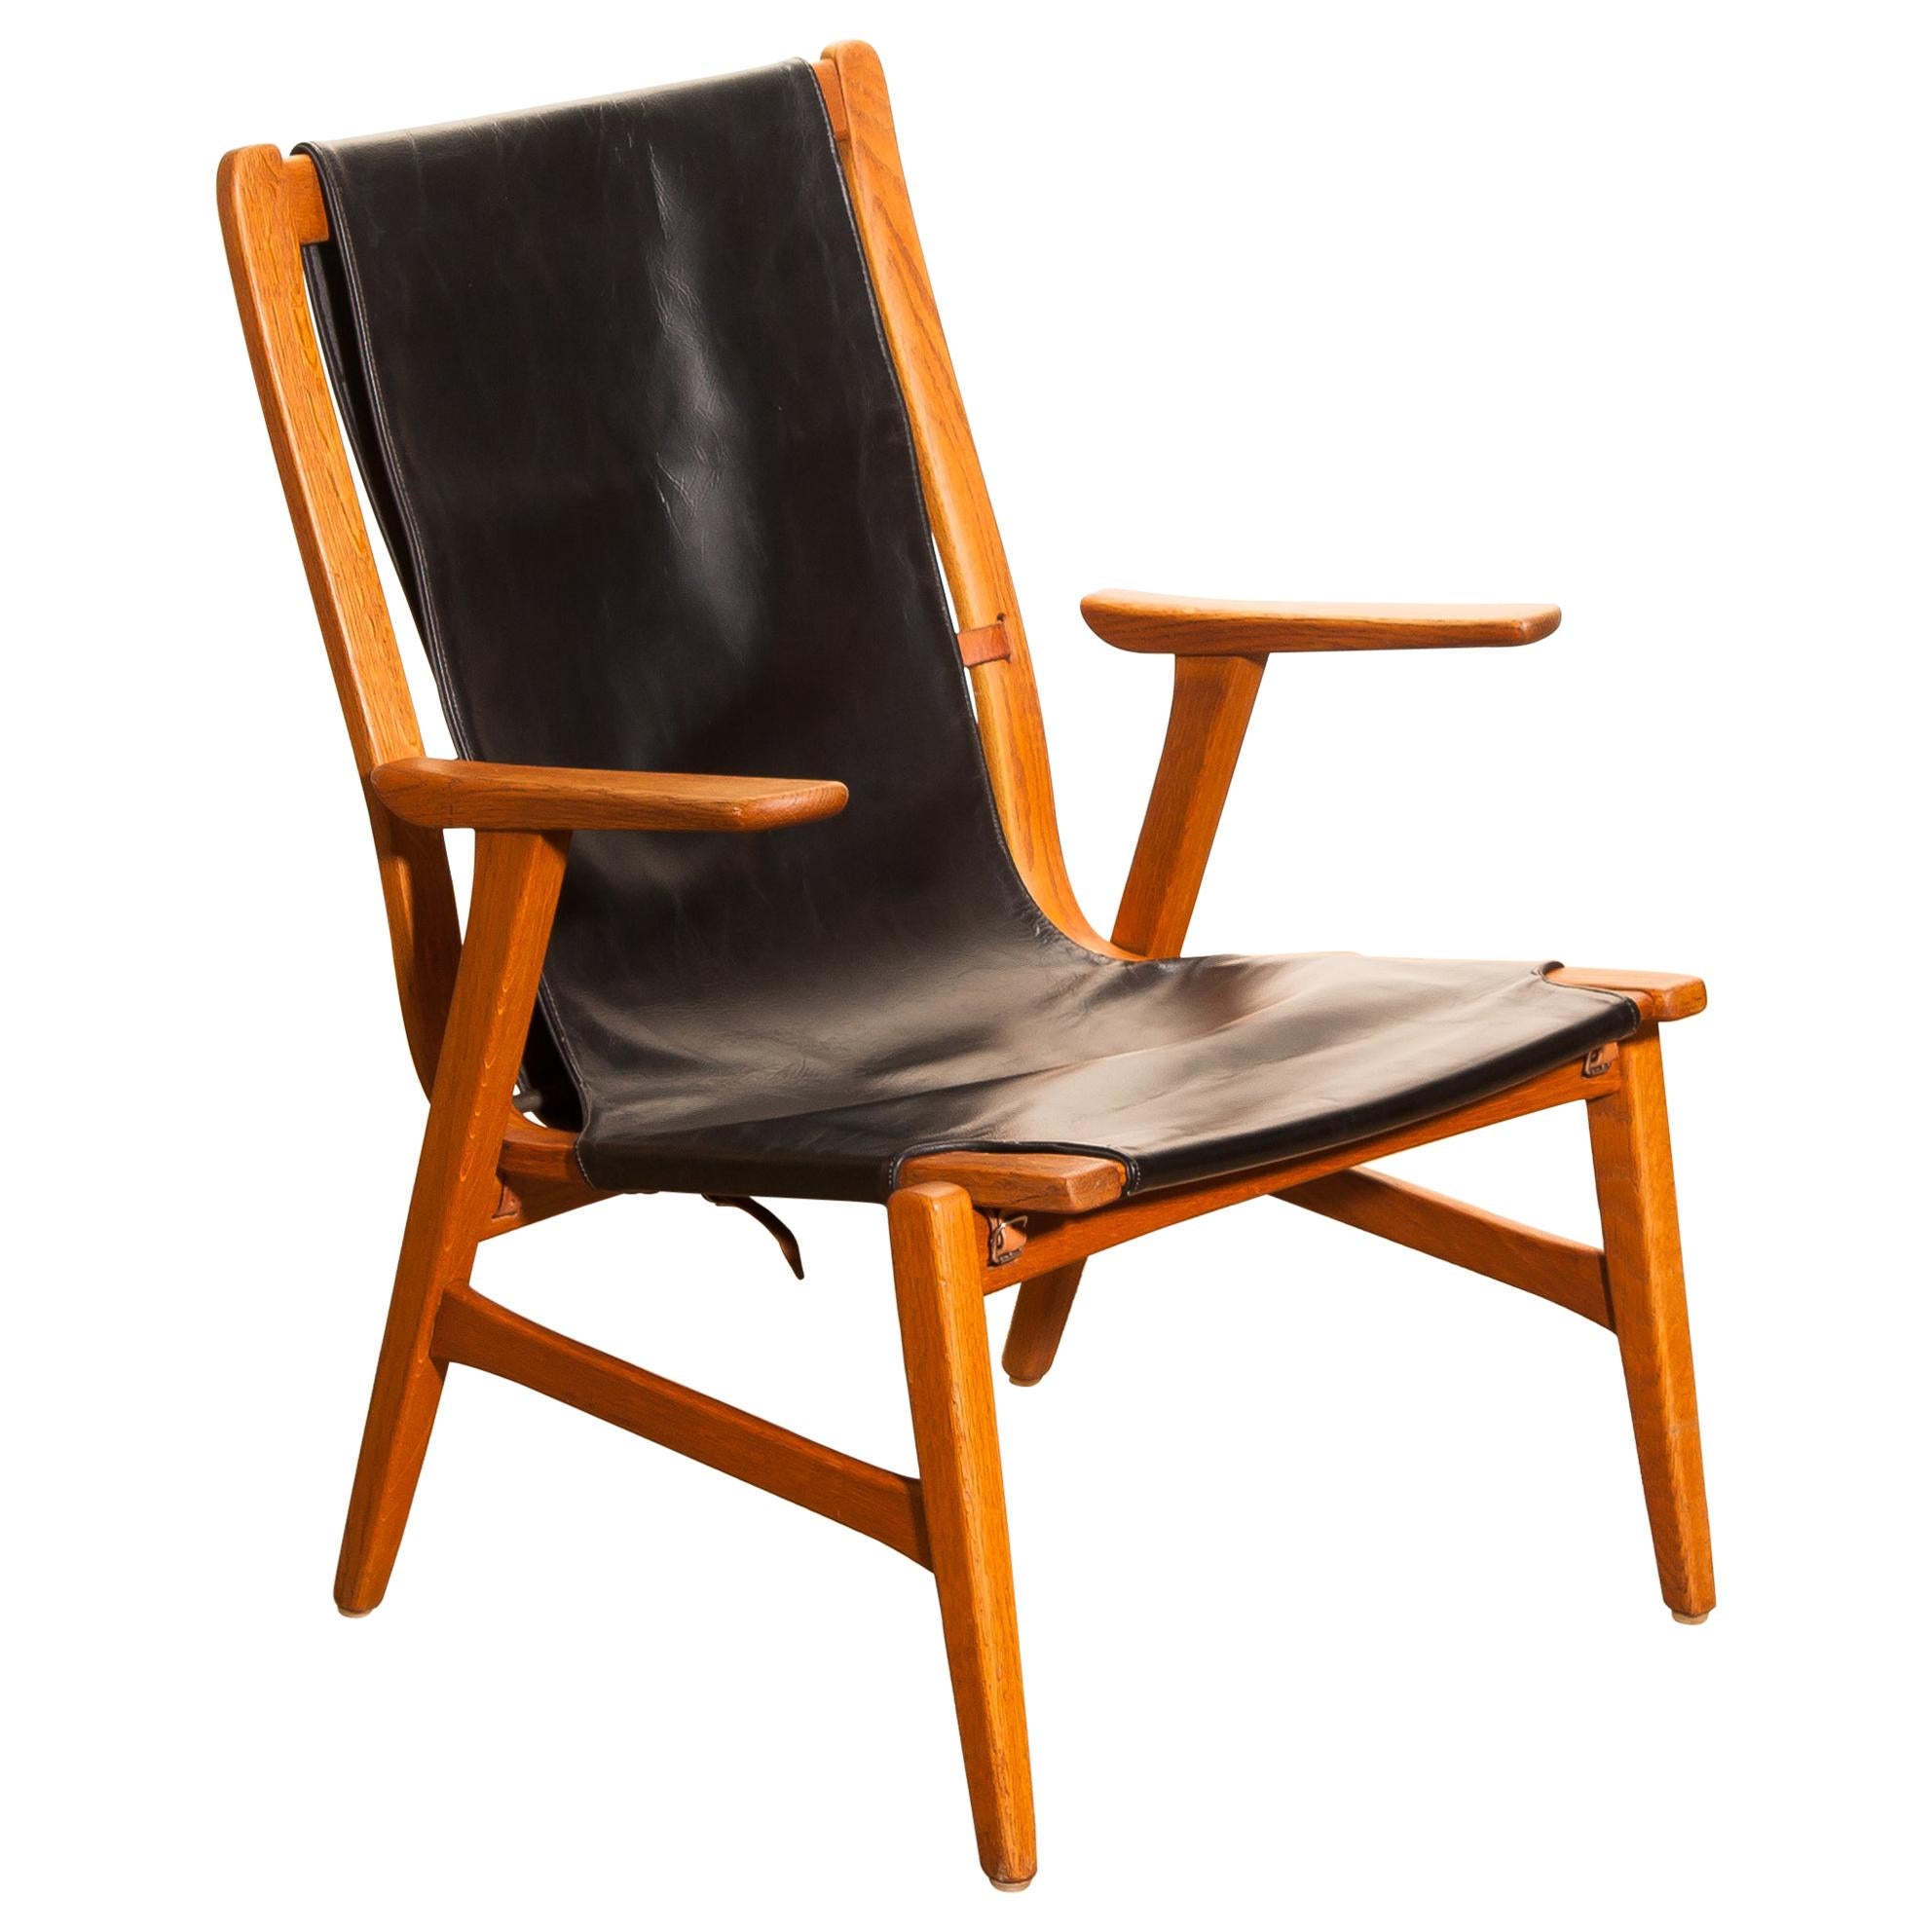 Wonderful hunting chair 'Ulrika' designed by Östen Kristiansson for Vittsjö, Sweden.
This beautiful chair is made of an oak frame with a black leatherette seating.
It is in very nice condition,
Period: 1950s.
Dimensions: H 82 cm, W 62 cm, D 60